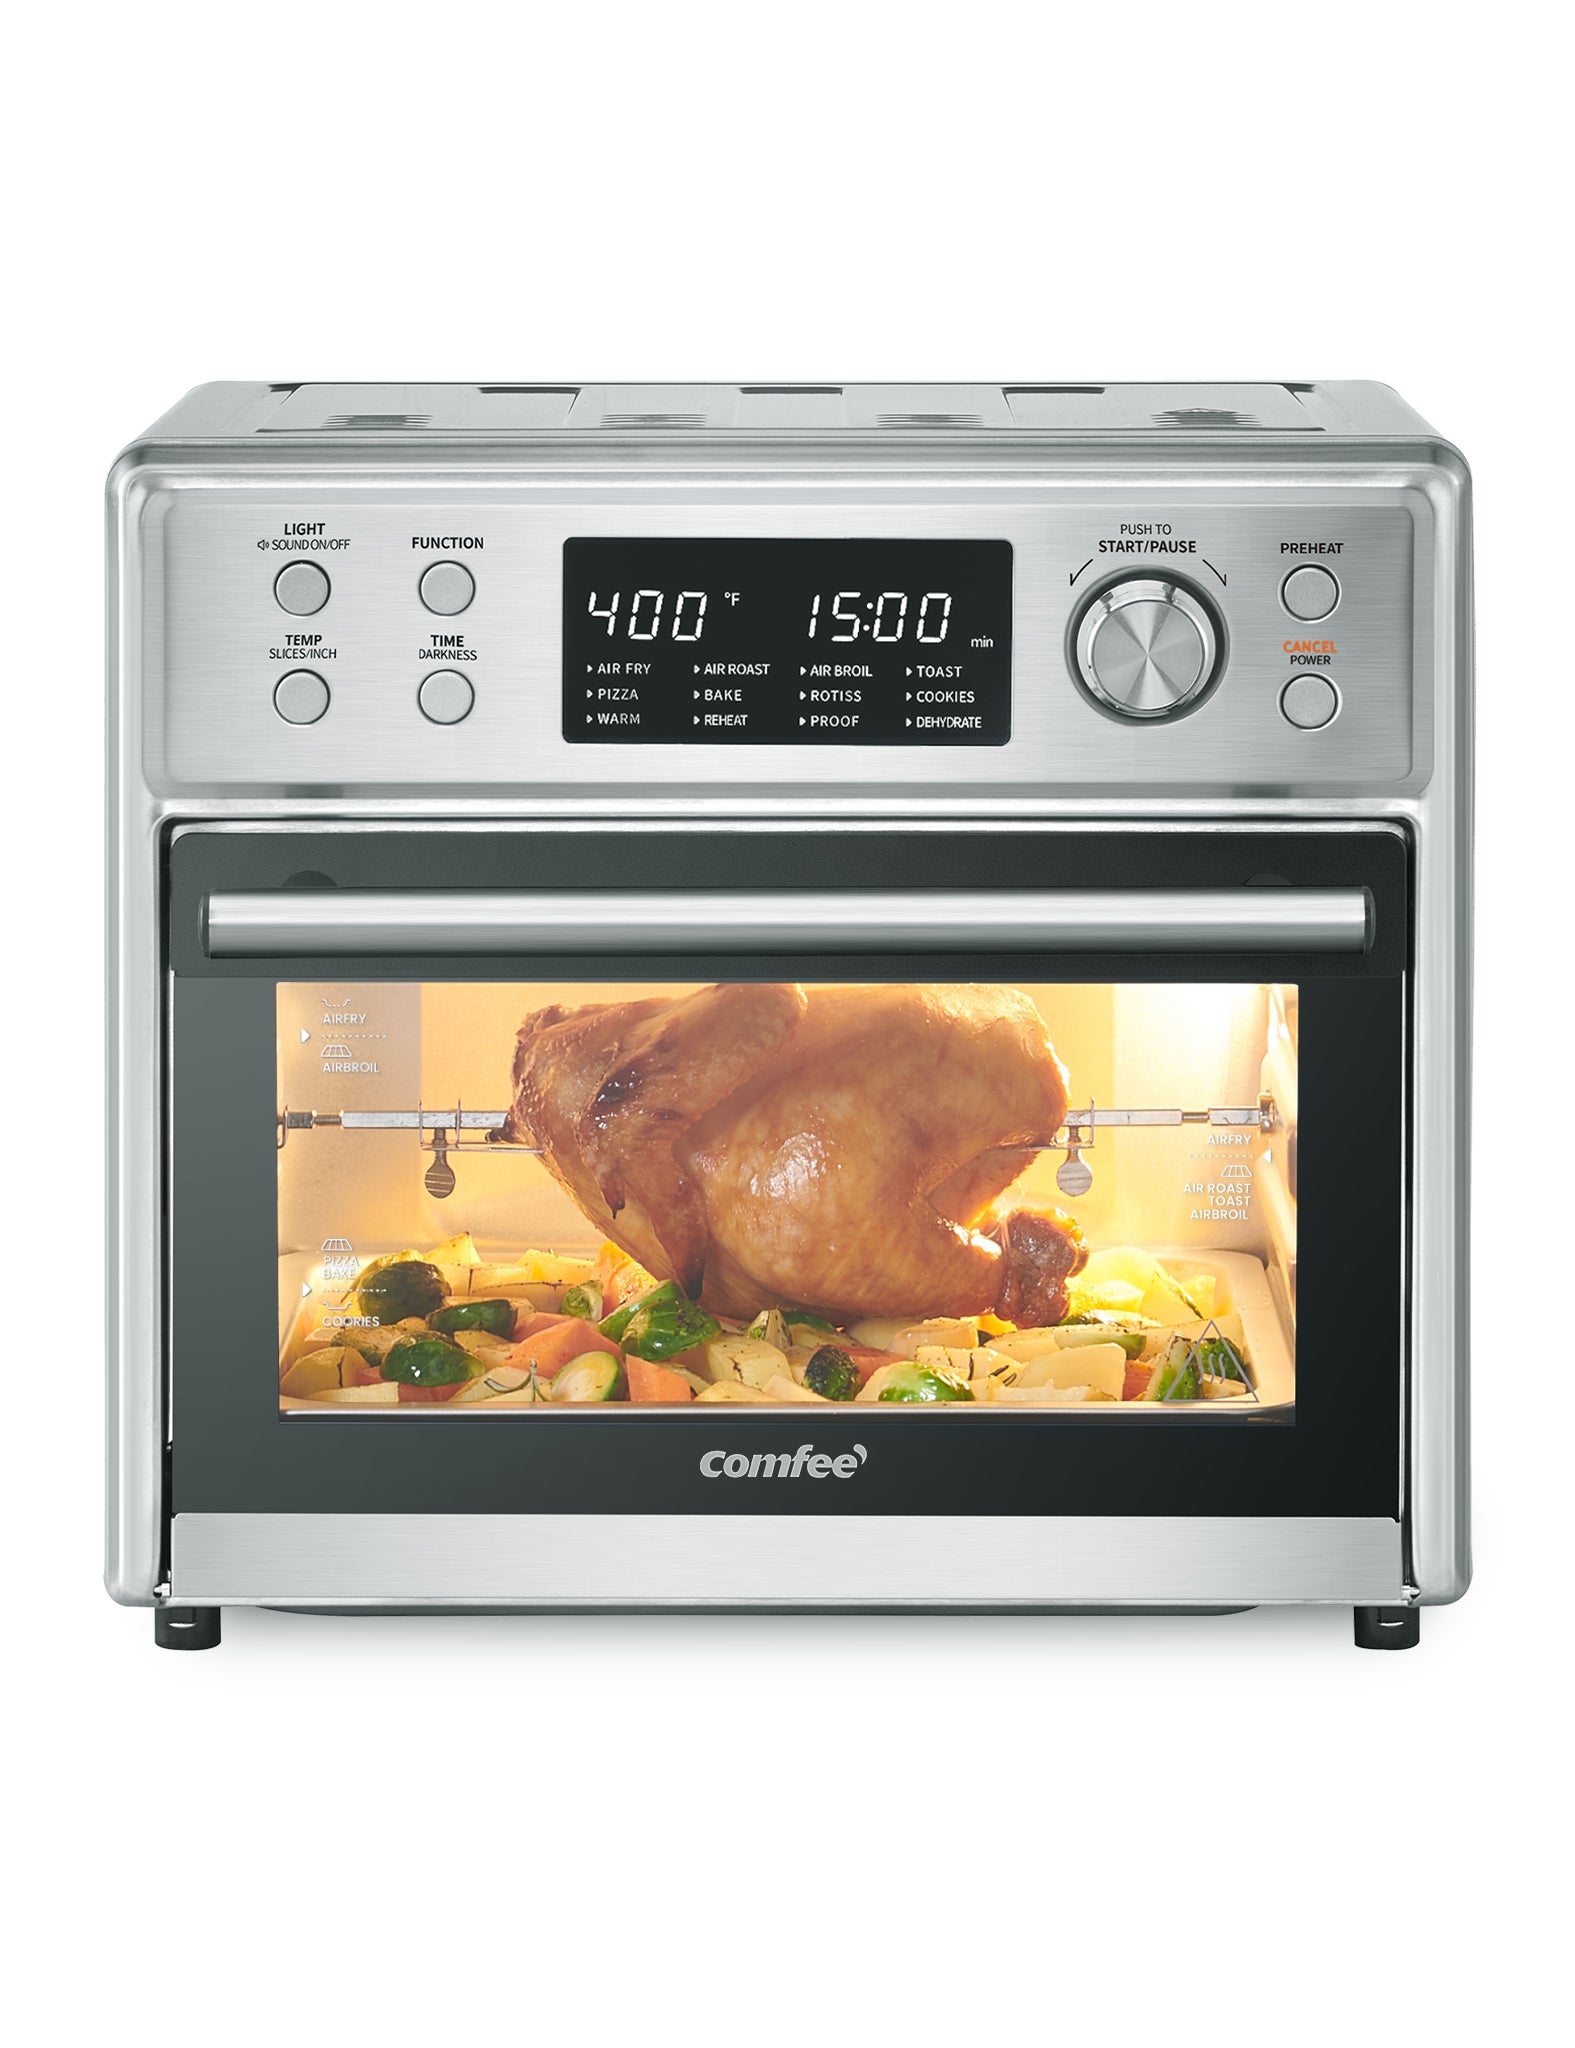 𝓞𝓘𝓜𝓘𝓢 Smart Large Air Fryer Toaster Ovens, 30L Extra Large 21 in 1  Convection Countertops Oven 32QT with Oven Air Rotisserie and Dehydrator,  1800W in Stainless Steel, Black 